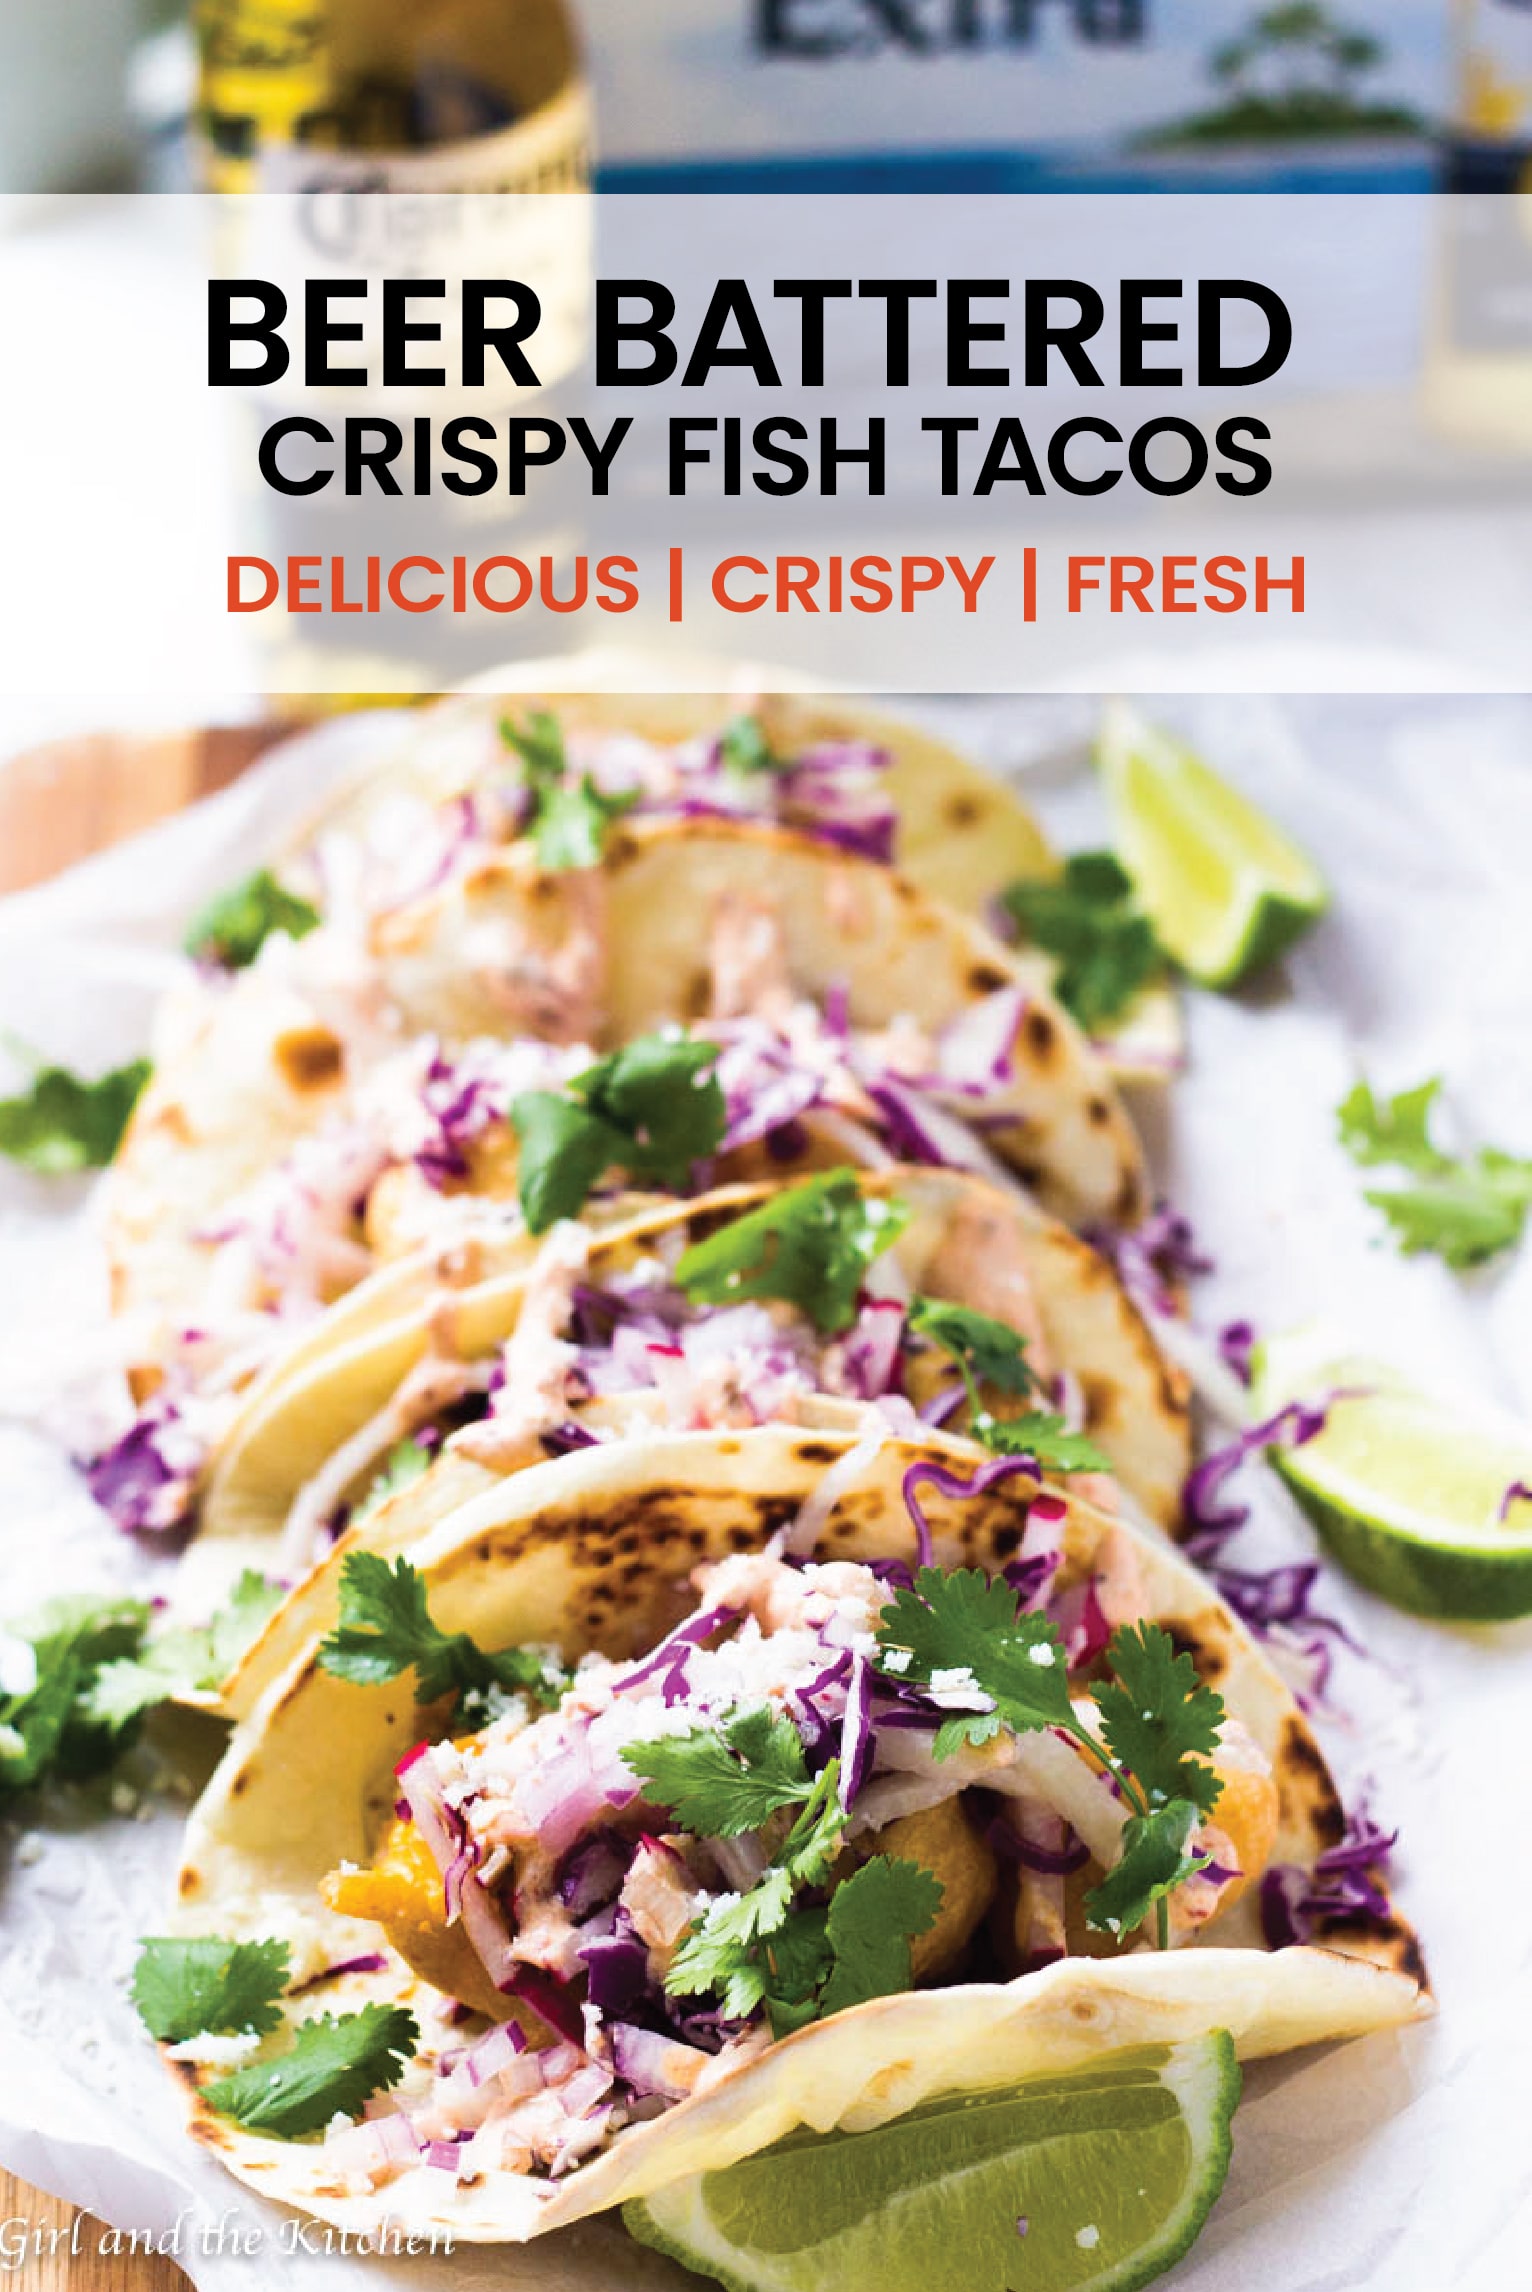 These delicious beer battered crispy fish tacos are a new twist on a Baja classic!  Dipped in a spicy beer batter and topped with a crunch and fresh slaw, these fish tacos will be the new standard to any summer party! #fishtacos #crispy #delicious